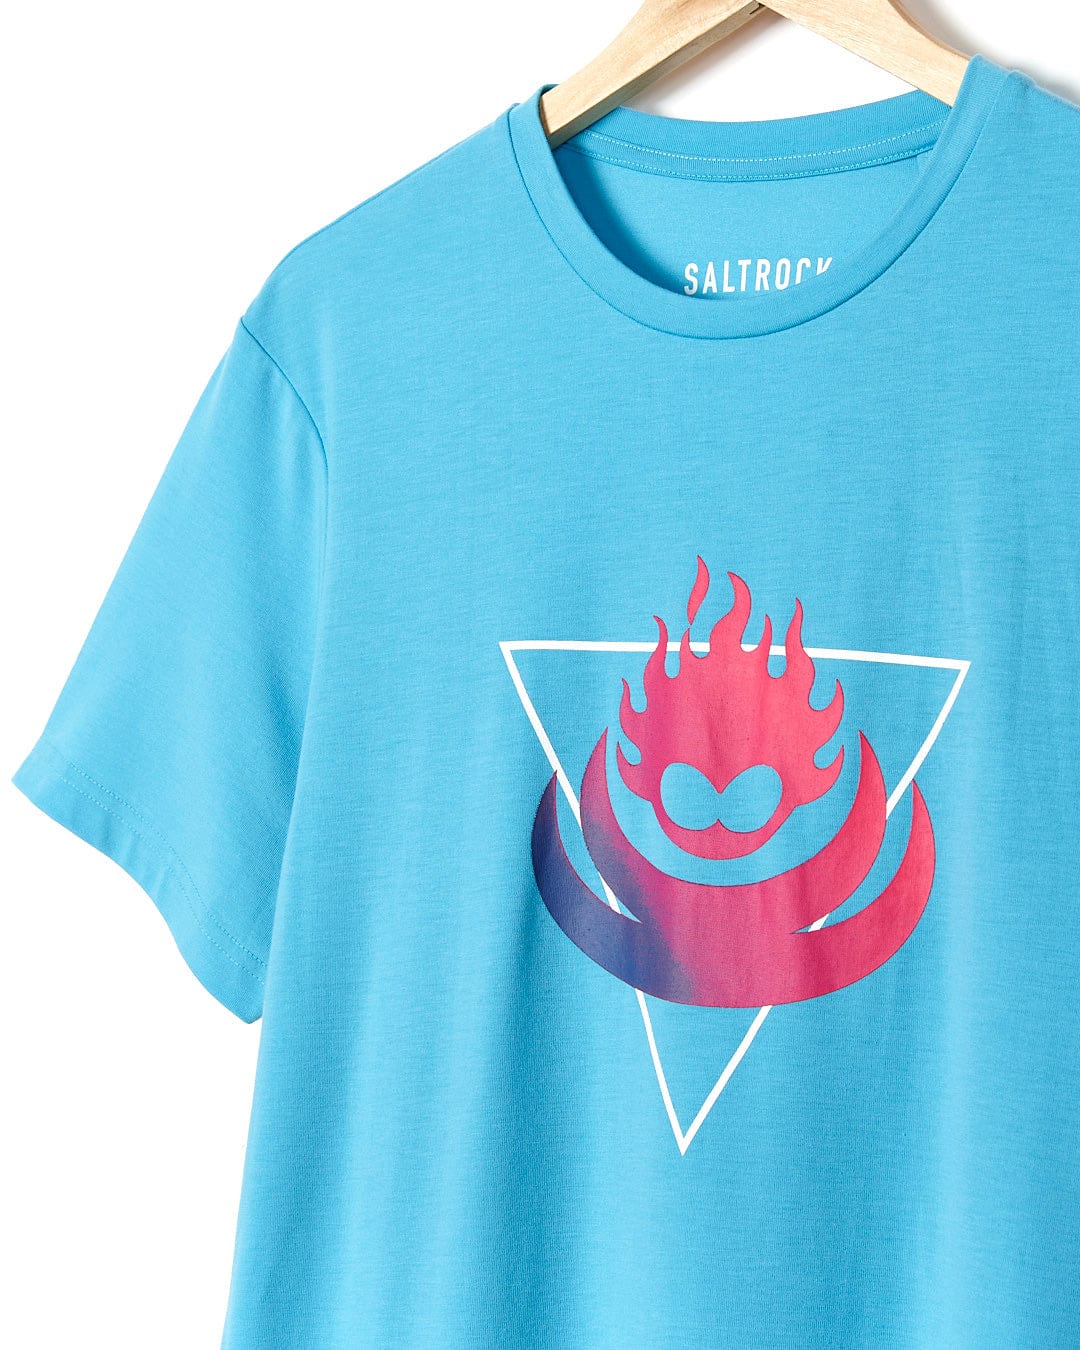 A Saltrock Flame Tri - Mens Recycled Short Sleeve T-Shirt in Teal with an image of a flame on it.